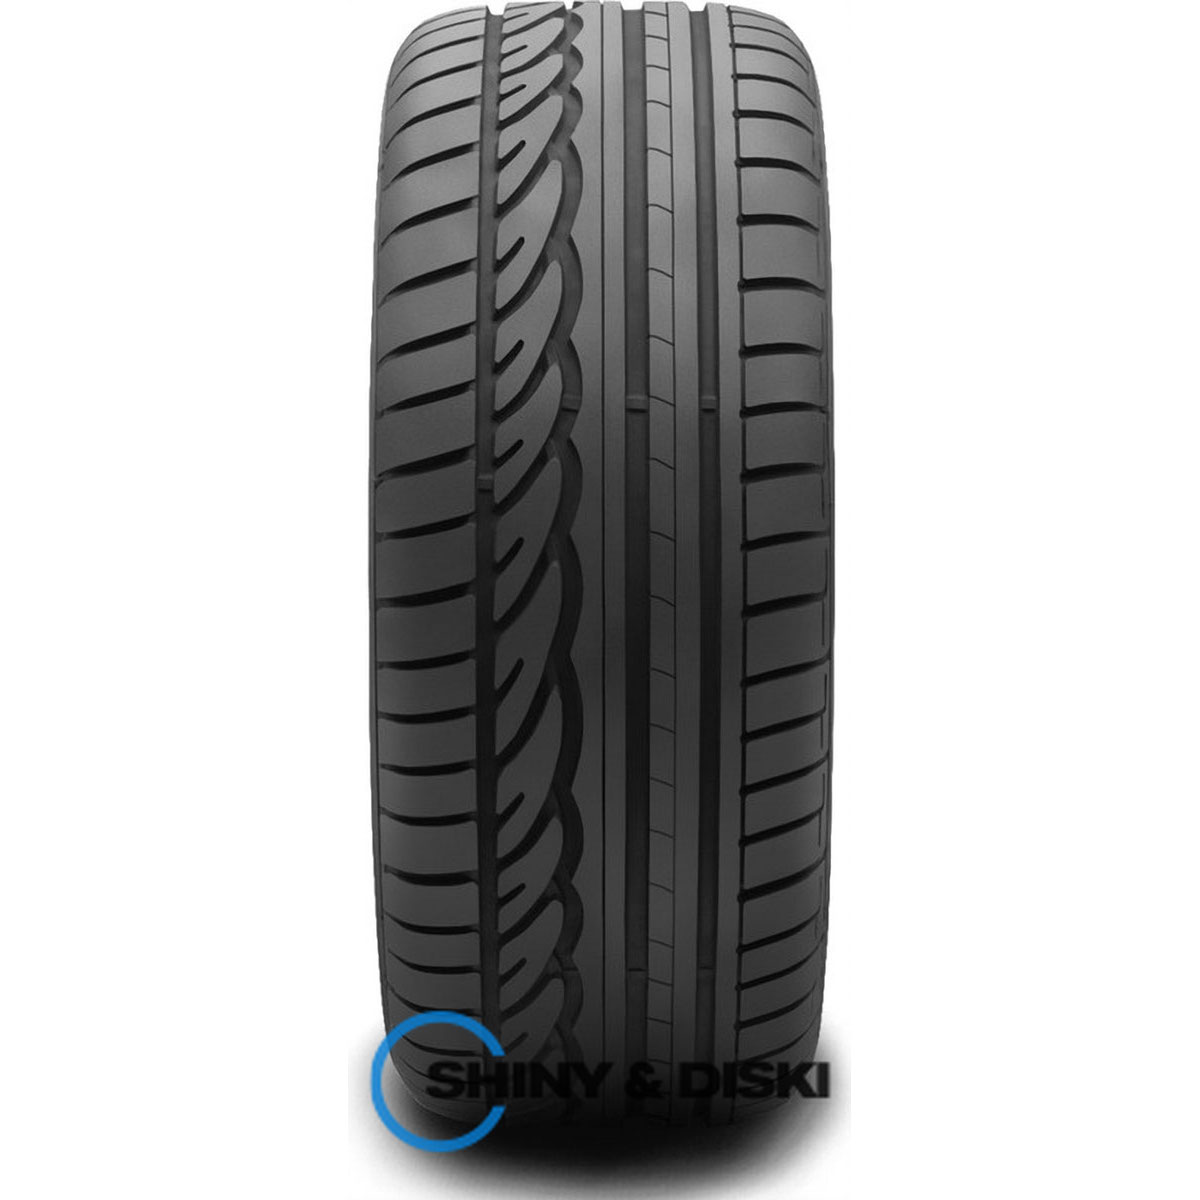 резина dunlop sp sport 01 a/s 225/55 r17 101v